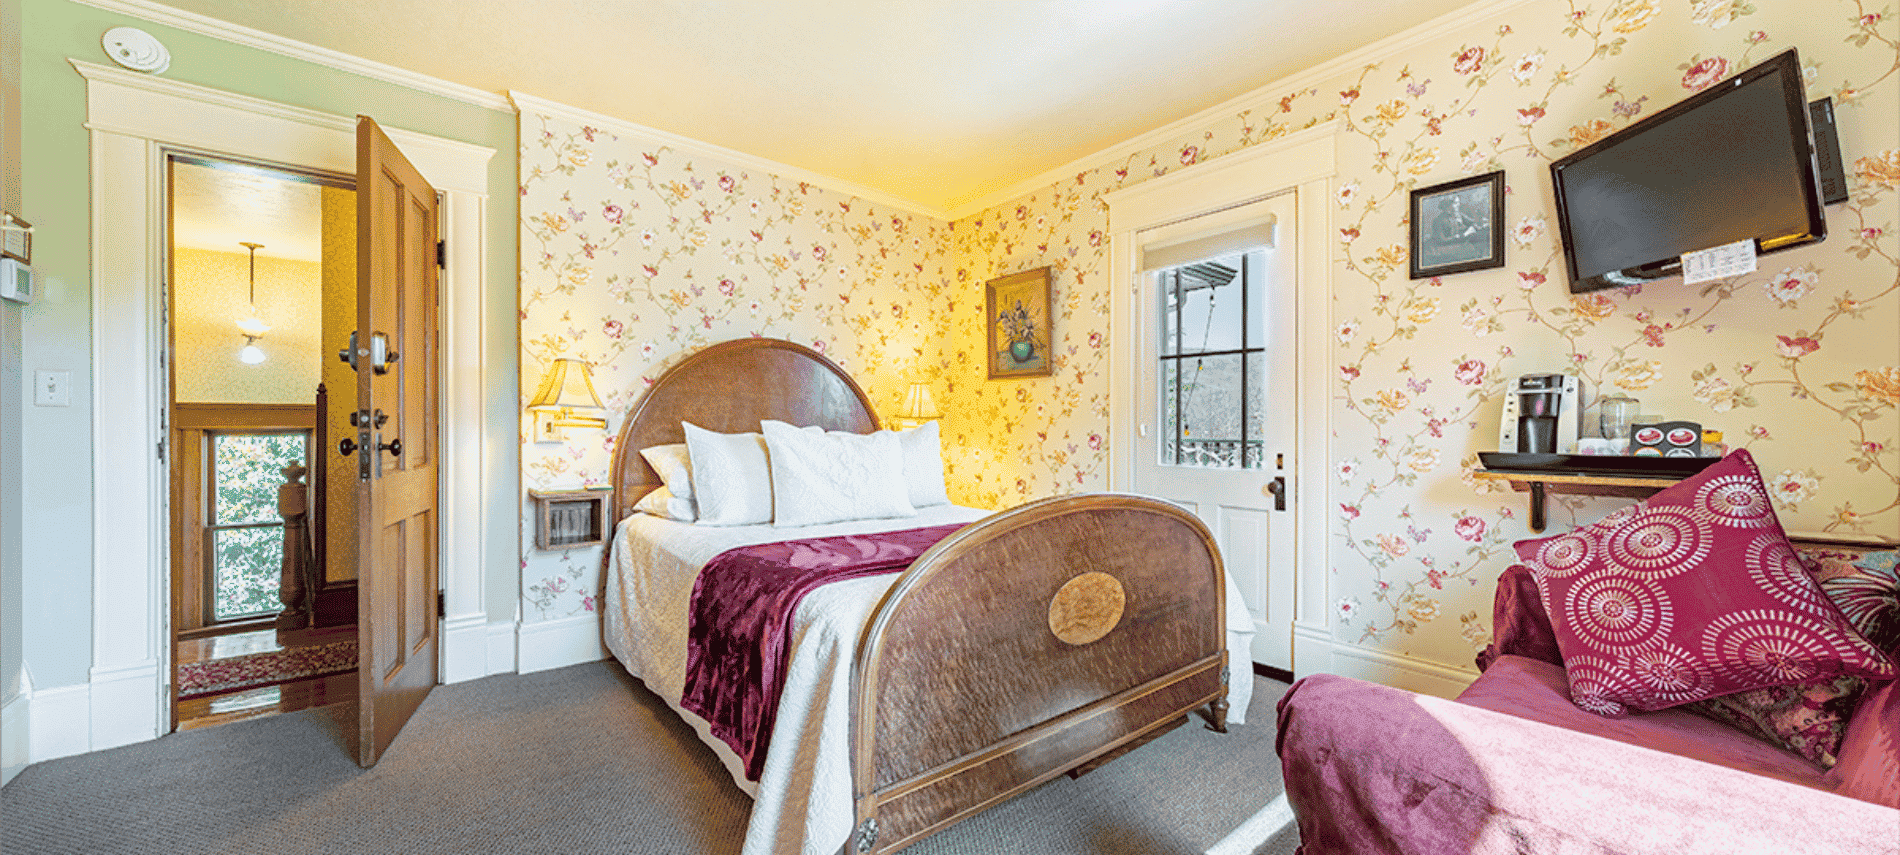 Queen guest room with floral wallpaper in pale green and pink with cream and maroon touches